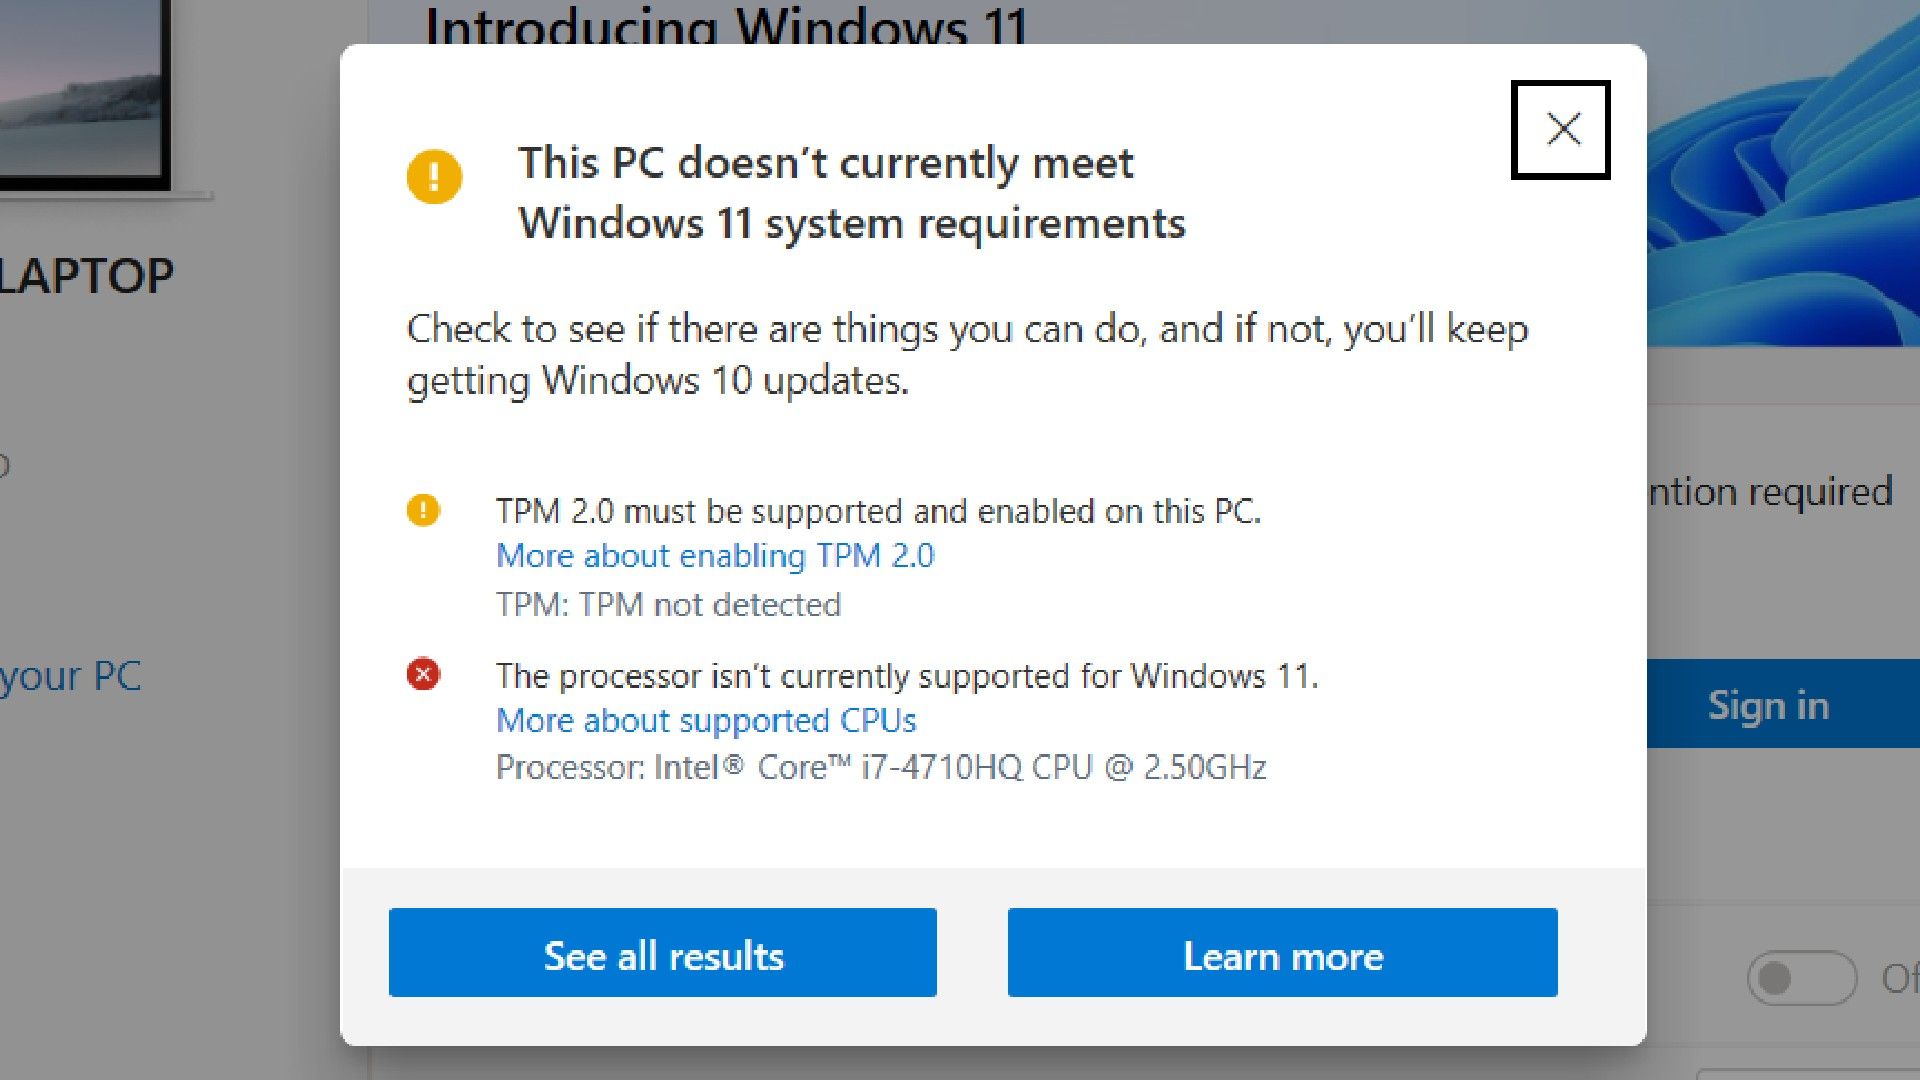 Pop up showing that this pc doesn't currently meet Windows 11 system requirements